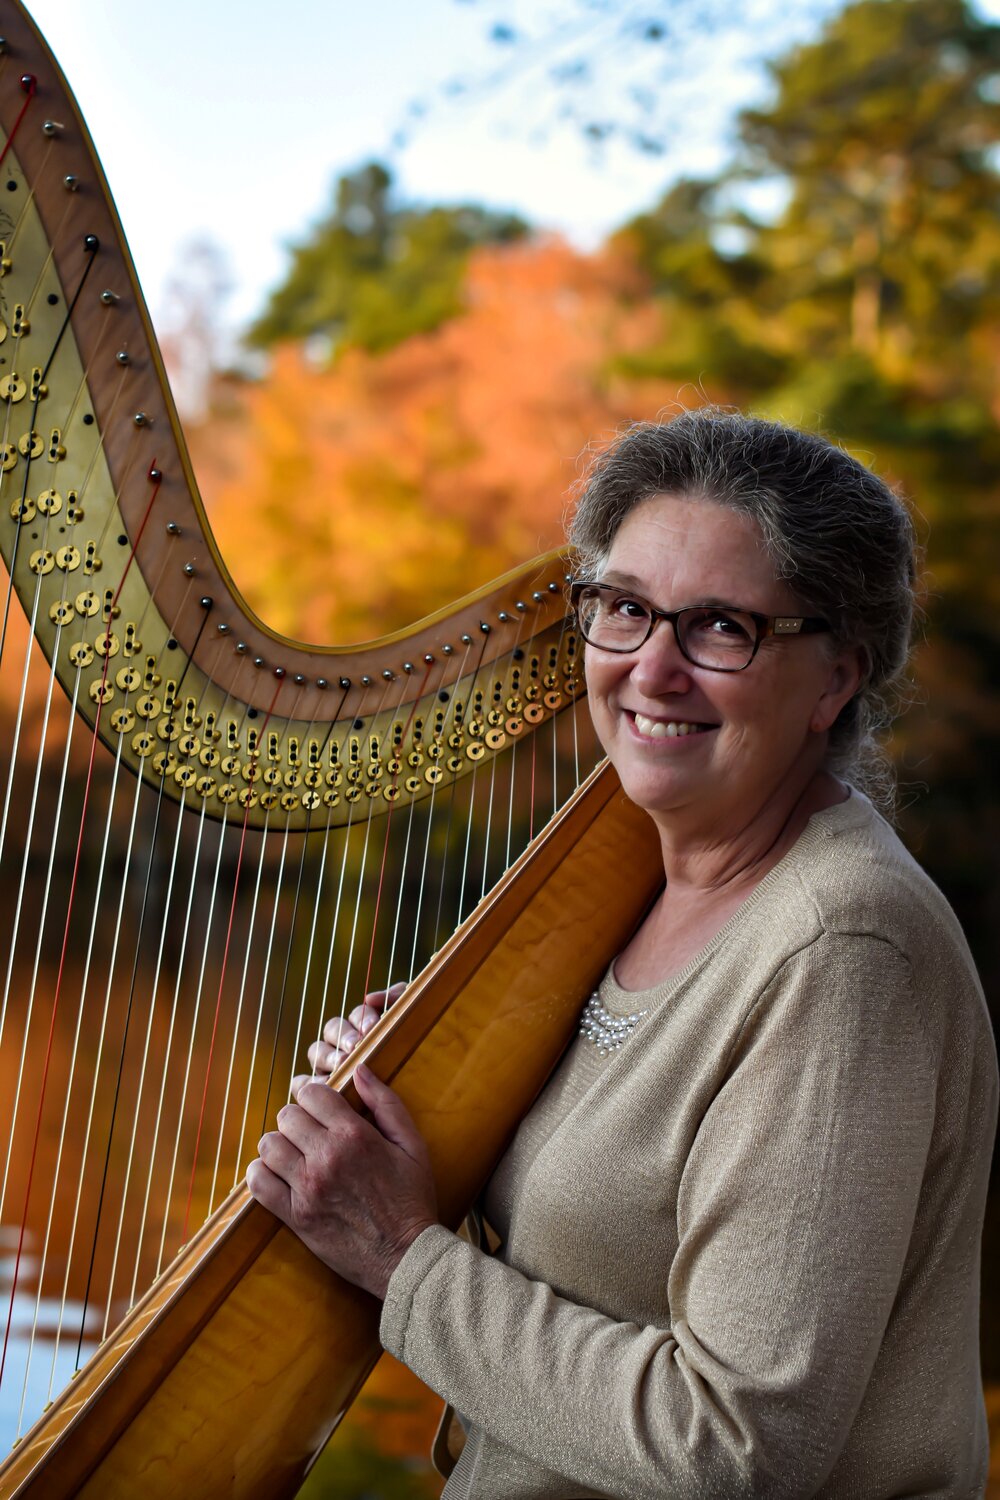 a woman with glasses holding a large harp